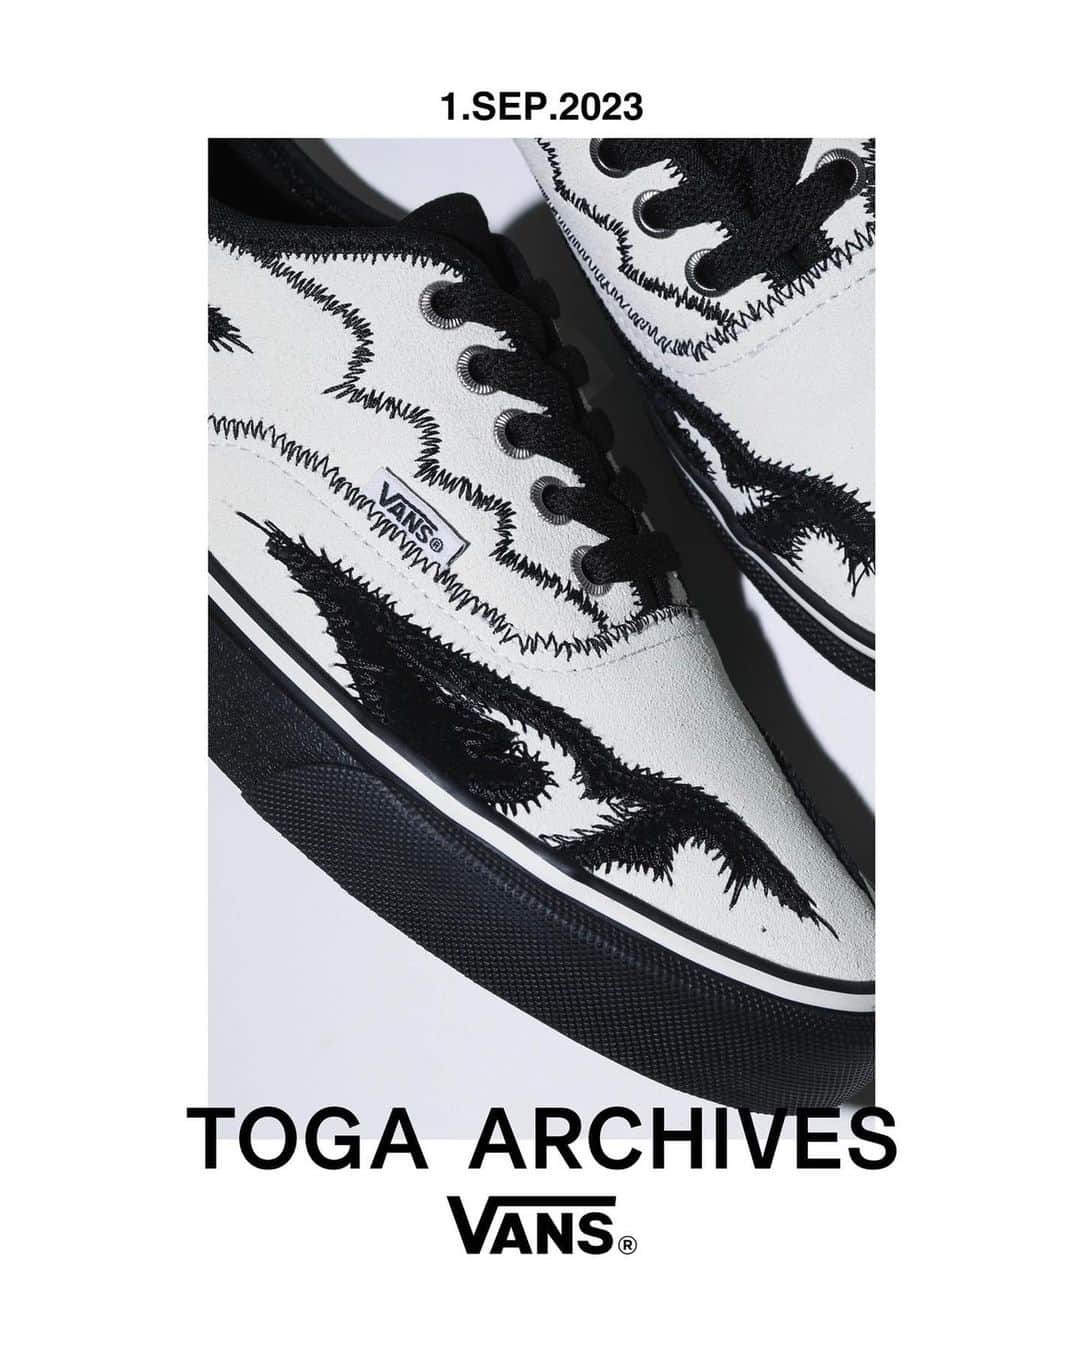 TOGAのインスタグラム：「9月1日(金)11:00AMより TOGA × VANSを発売致します。  TOGA × VANS collaboration will launch on Friday 1st of September 11:00AM JST.  【AUTHENTIC VANS × TOGA】*socks included color: off white size: TOGA STORES 22cm~29cm (unisex) BEAMS 23cm~29cm (half sizes incl.) price: 27,500 yen (25,000 before-tax)  【SWEAT SHIRTS VANS × TOGA】 color: black size: S, M, L, XL price: 16,500 yen (15,000 before-tax)  【STORES】 TOGA HARAJUKU TOGA SHIBUYA PARCO TOGA OSAKA TOGA HANKYU UMEDA *10:00AM 抽選入場/raffle entry TOGA KANAZAWA TOGA ONLINE STORE  BEAMS WOMEN HARAJUKU BEAMS ONLINE STORE VANS HARAJUKU  @vansjapan @beams_women_harajuku  @togaarchives_online  https://store.toga.jp/  #vansjapan #vansauthentic #togaarchives」